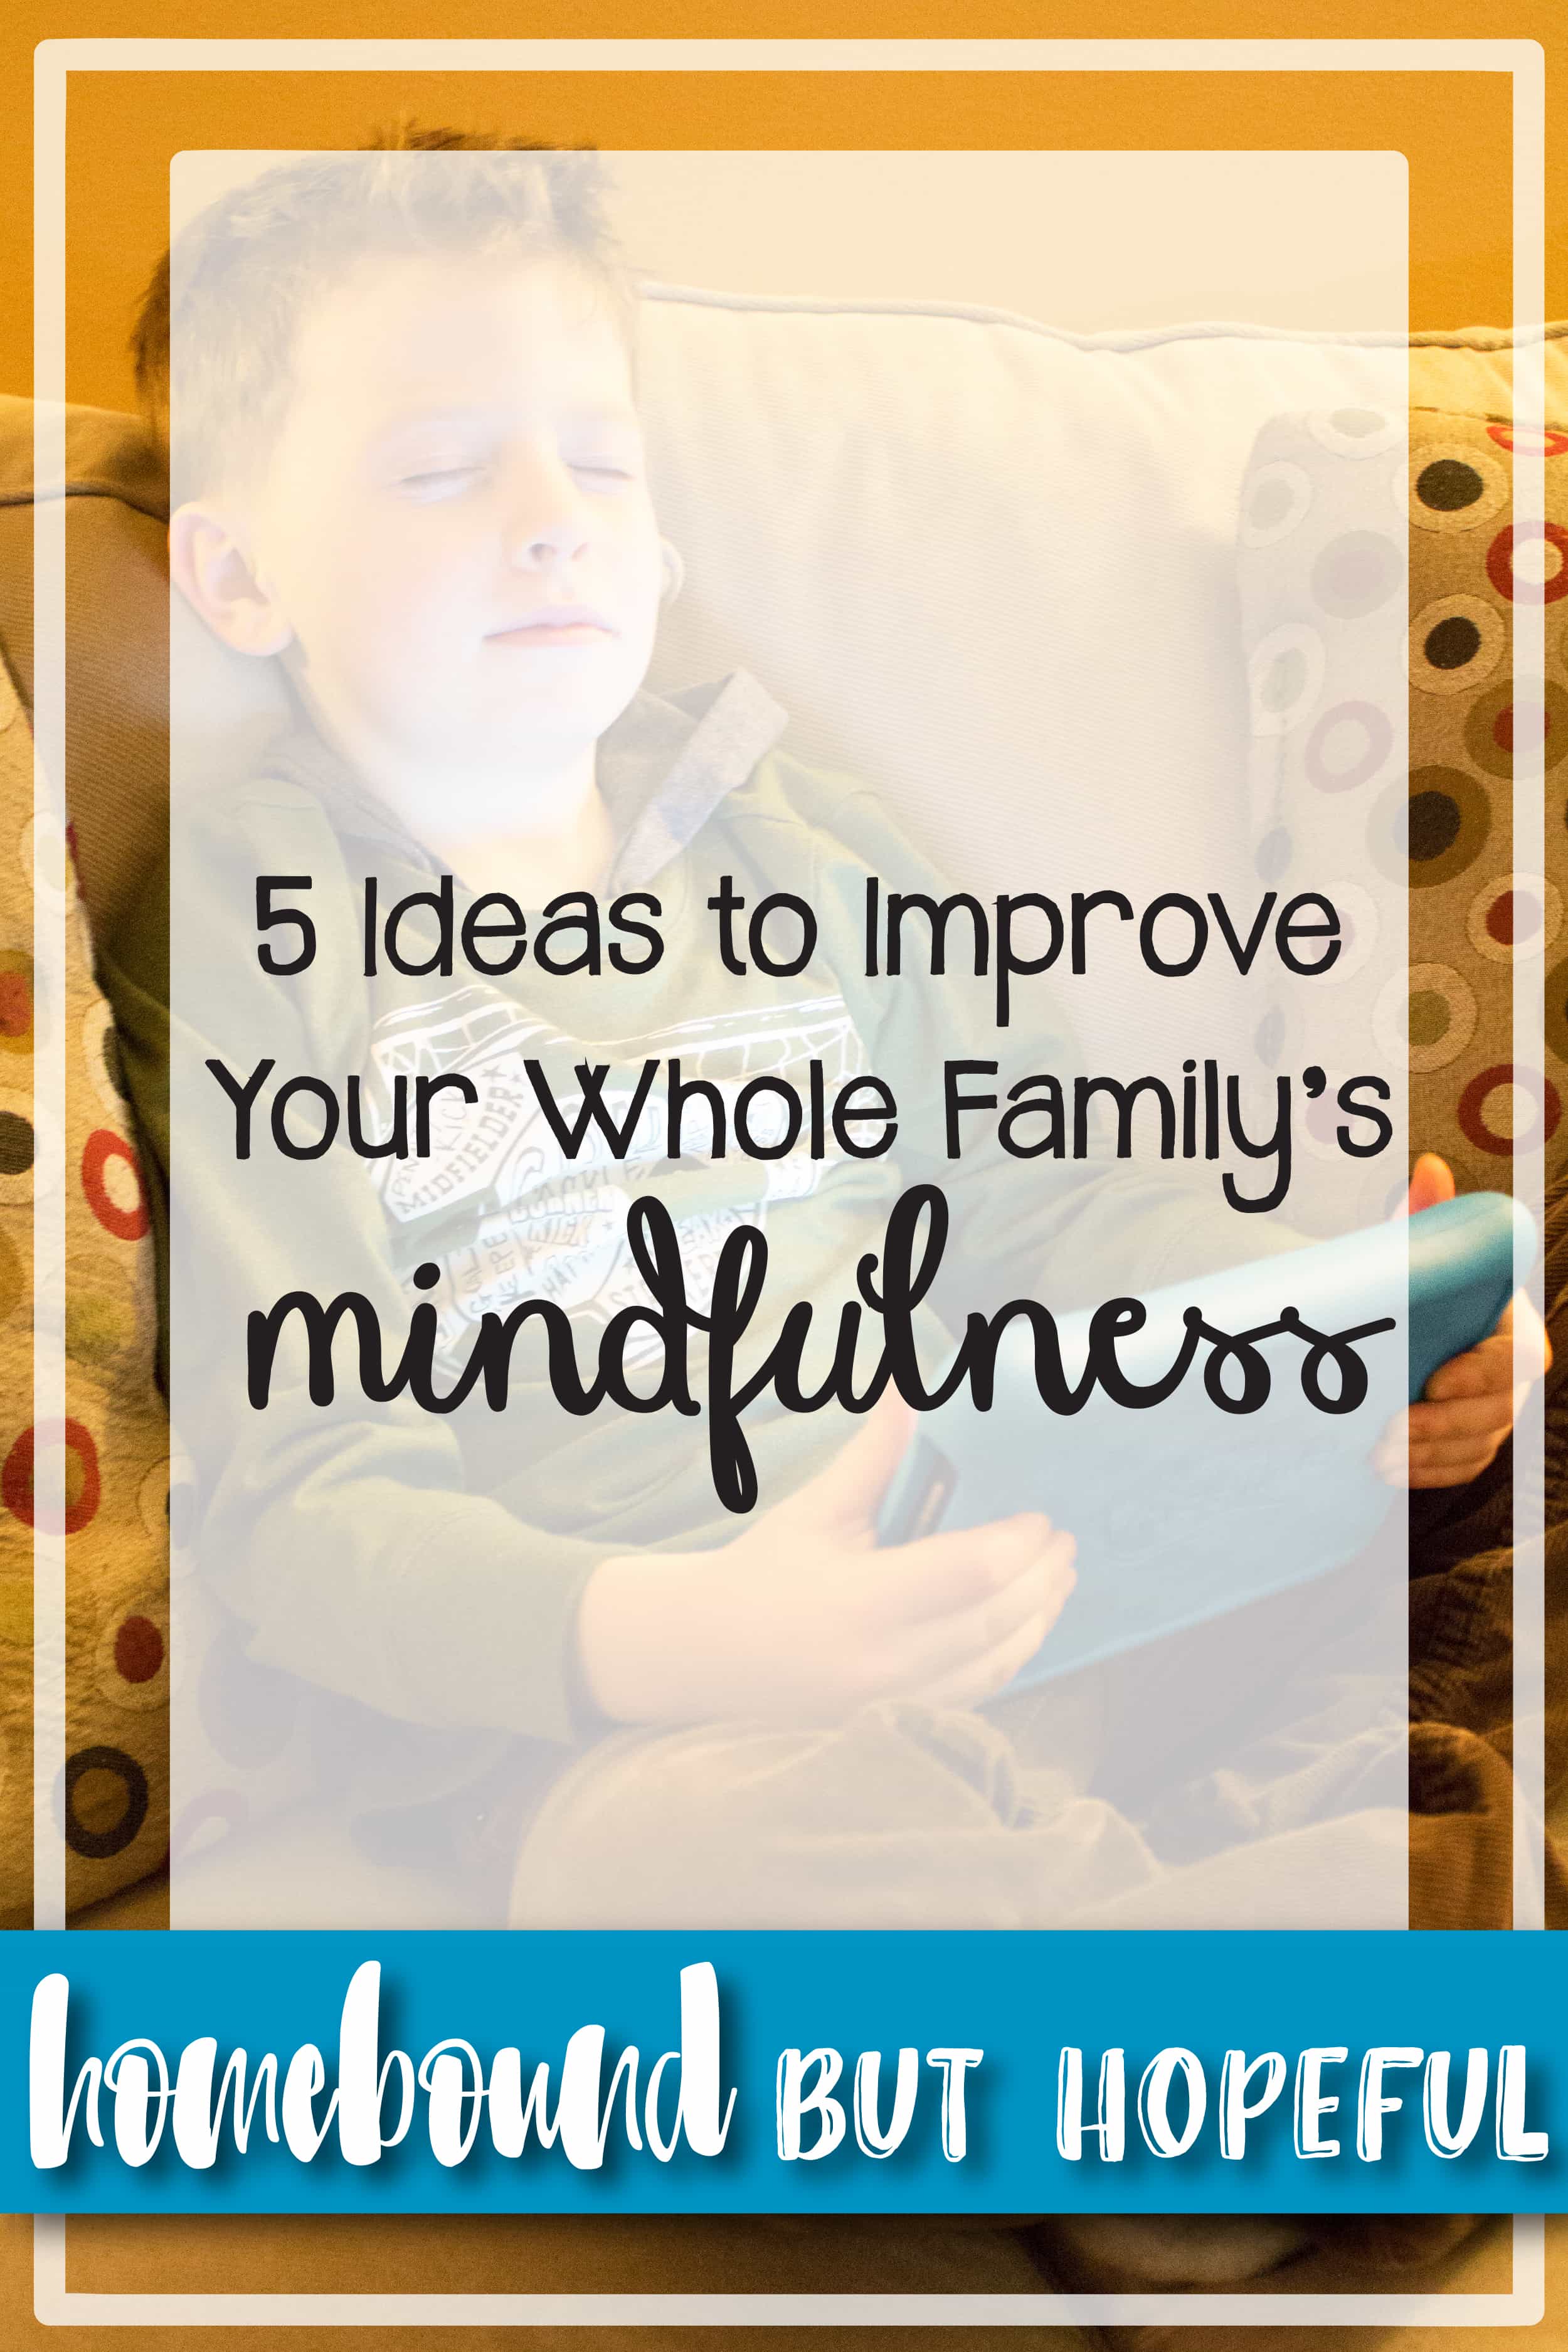 Family feeling a bit frazzled lately? I've got 5 great ways the entire family can work towards increased mindfulness.